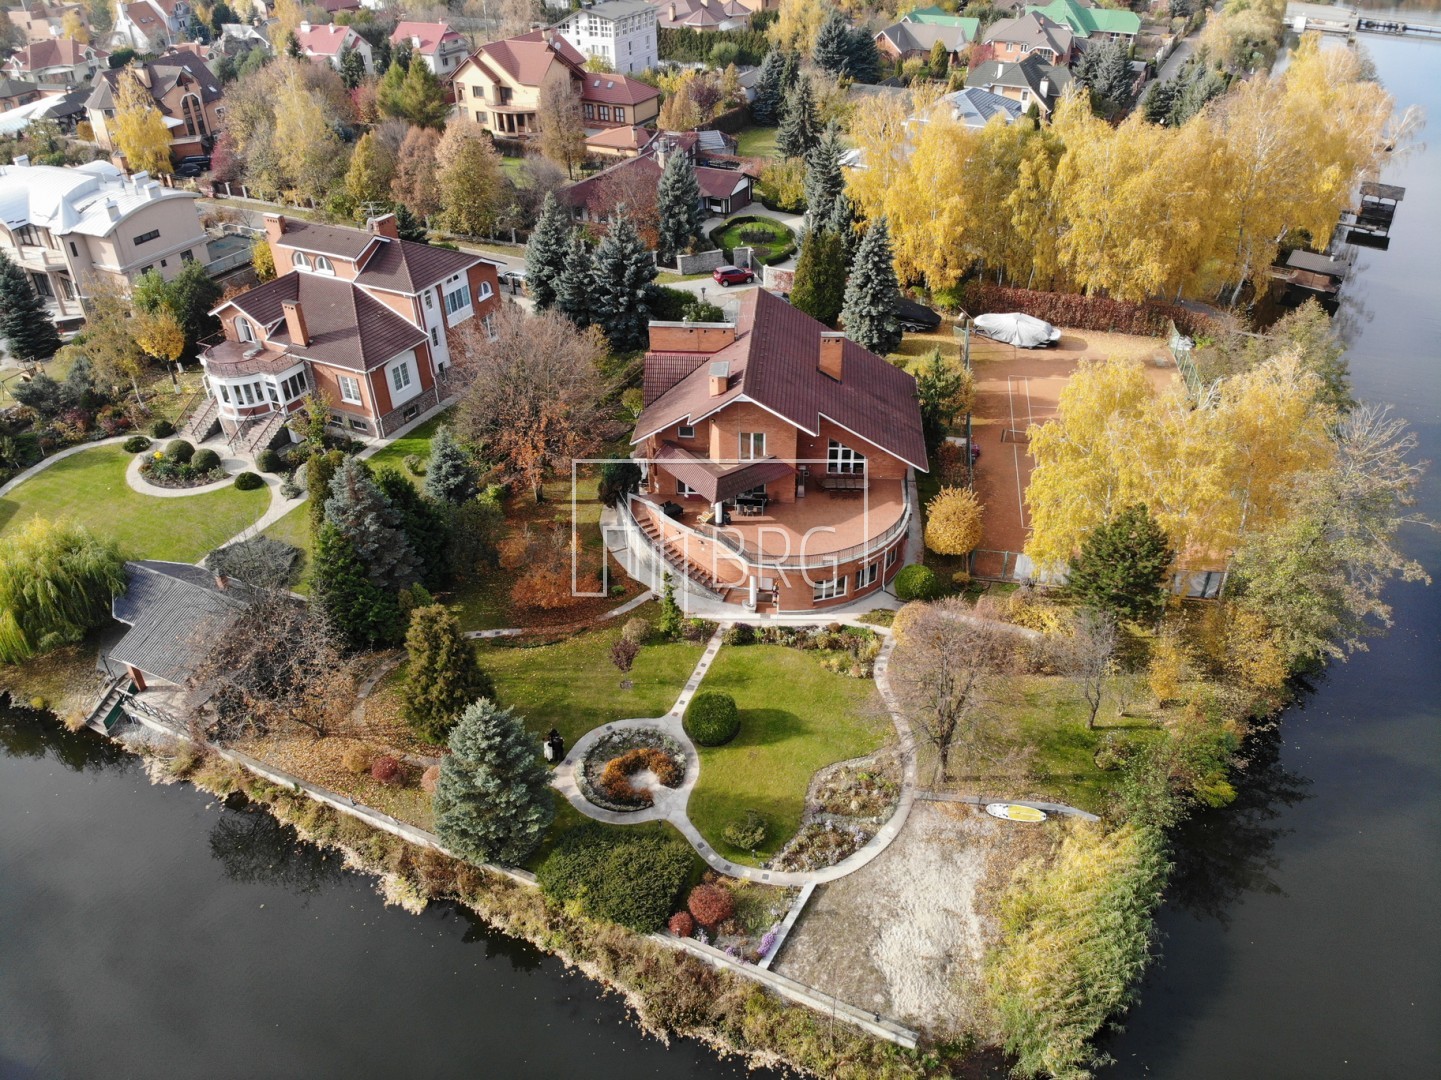 House KG Golden Gate 536m with a tennis court and access to the river Kozinka. Kiev region